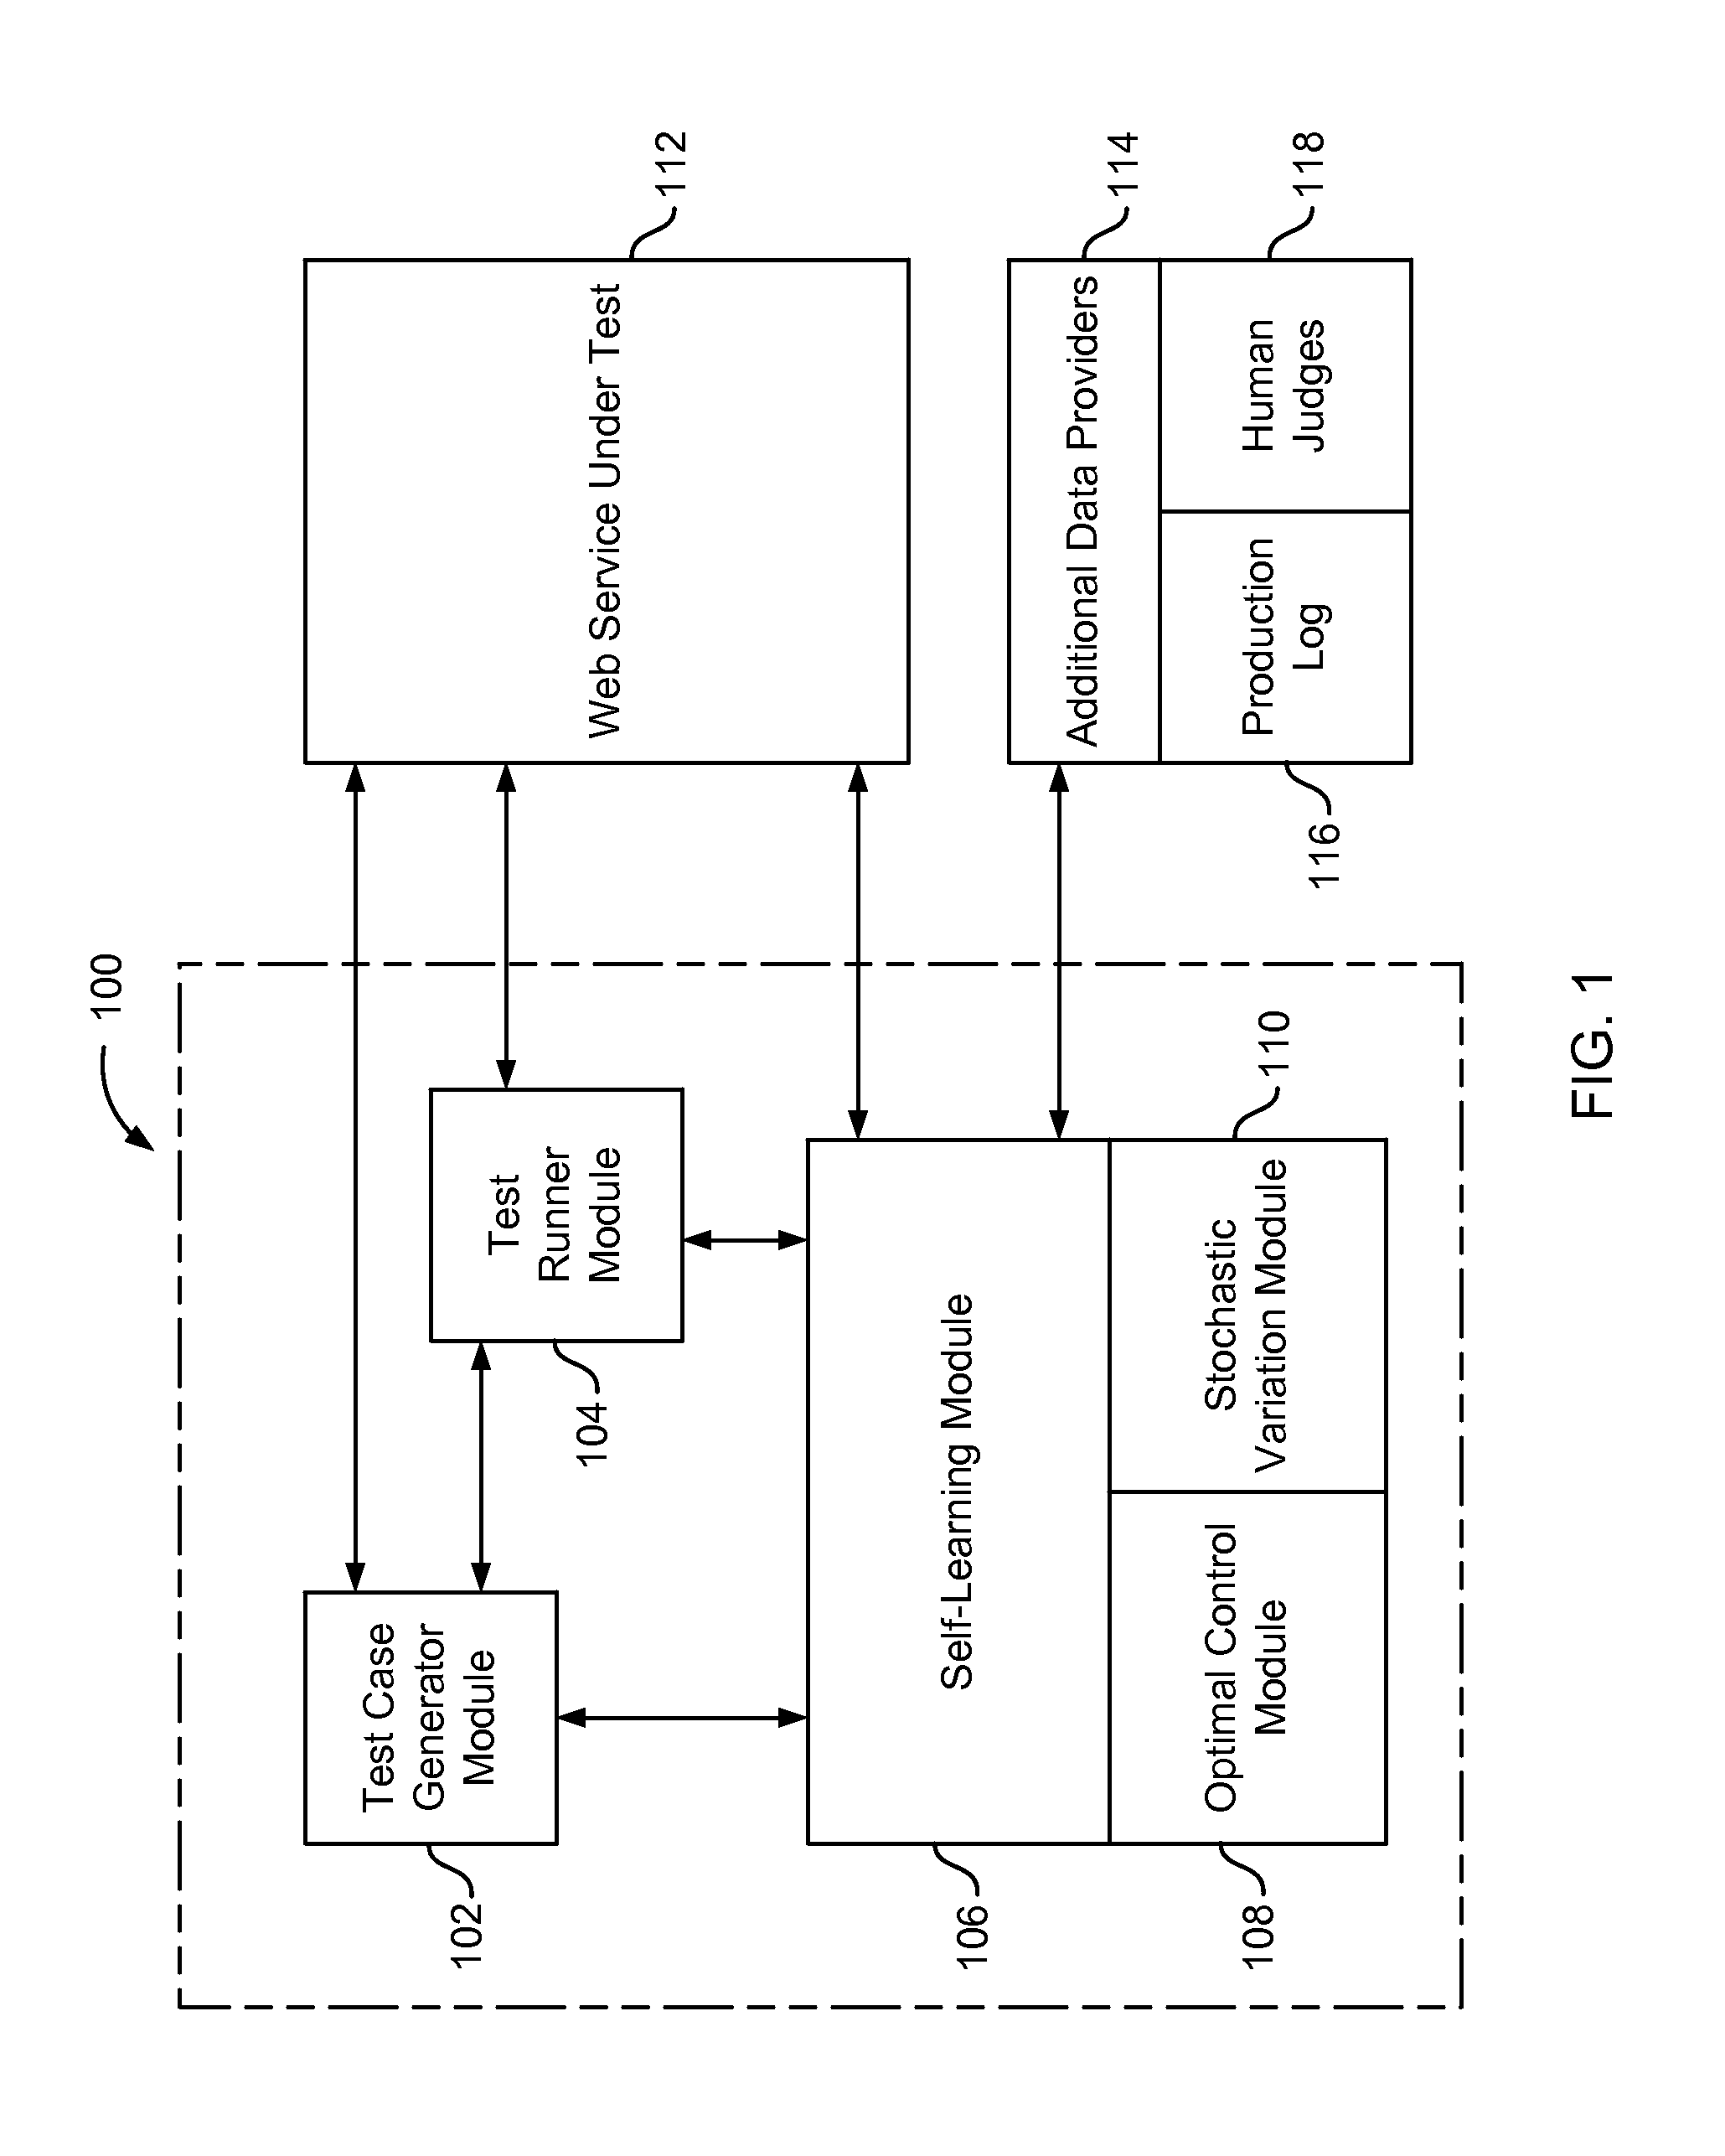 Integration testing method and system for web services